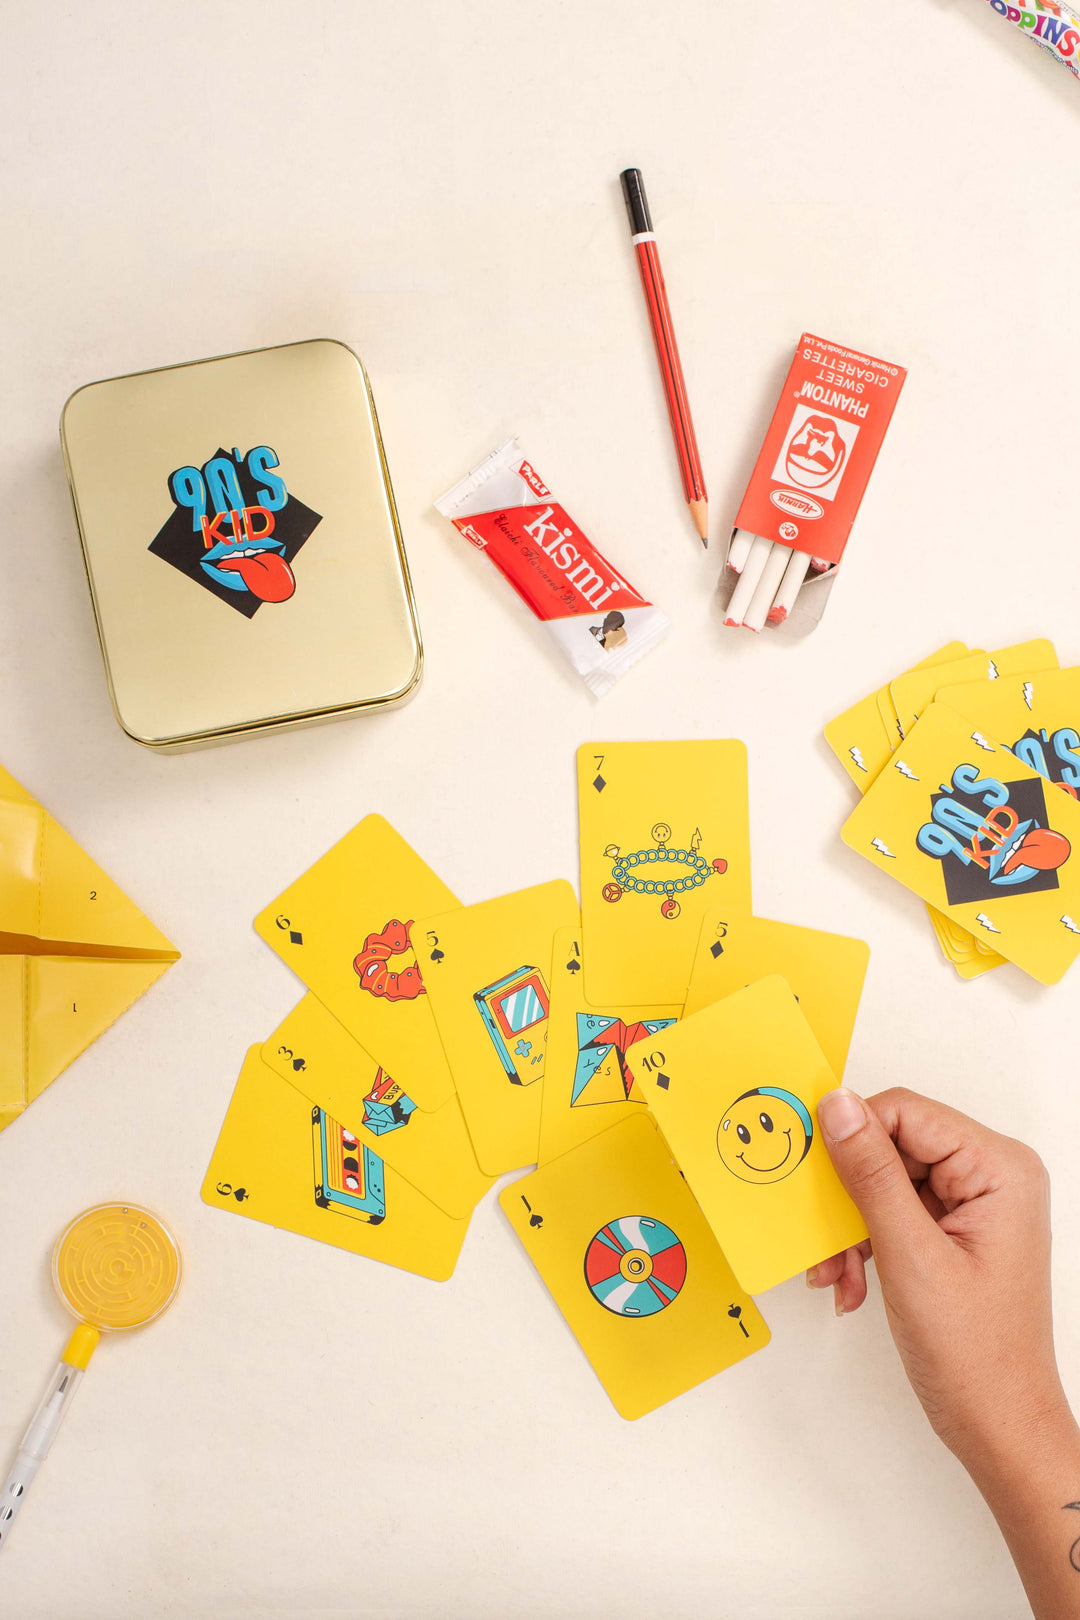 90s-kid-playing-cards-from-confetti-gifts